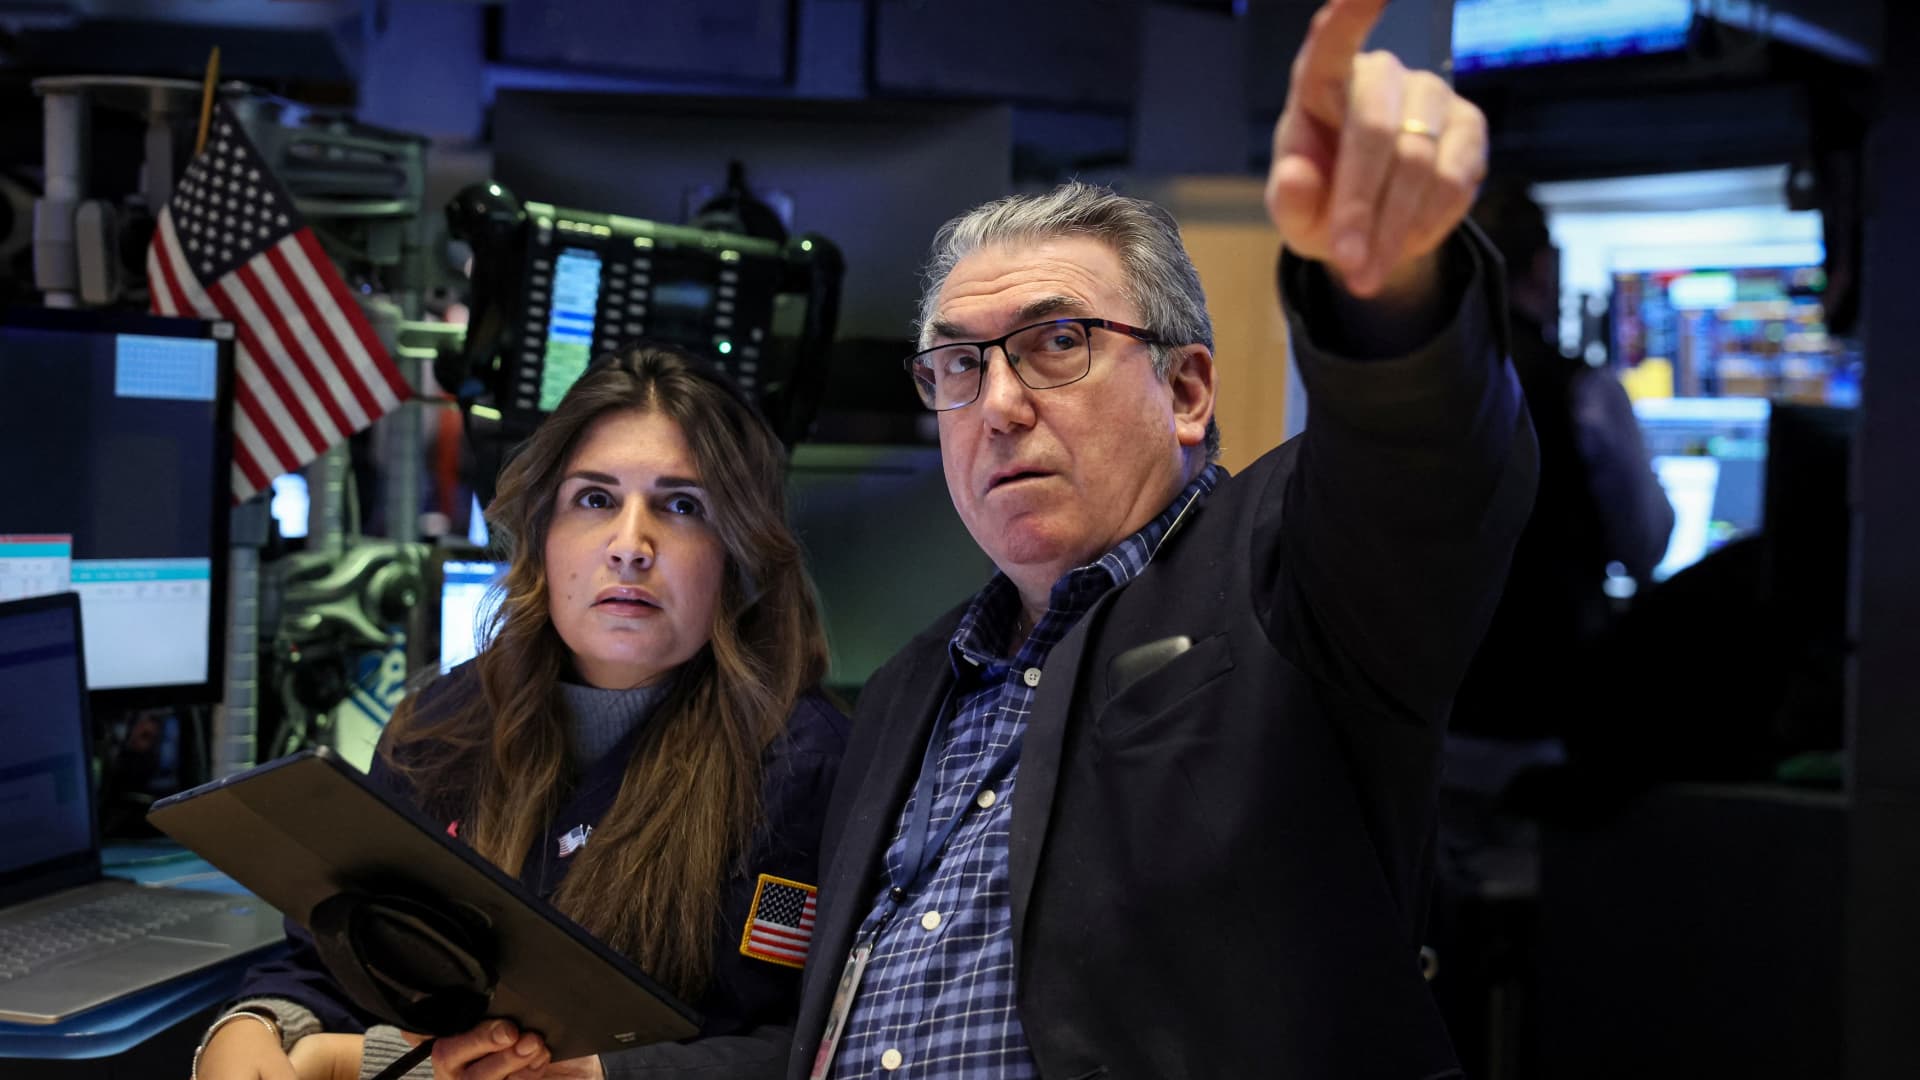 The Nasdaq Composite     fell for a sixth straight session on Friday, on track for its longest losing streak in more than a year. The downtrend comes 